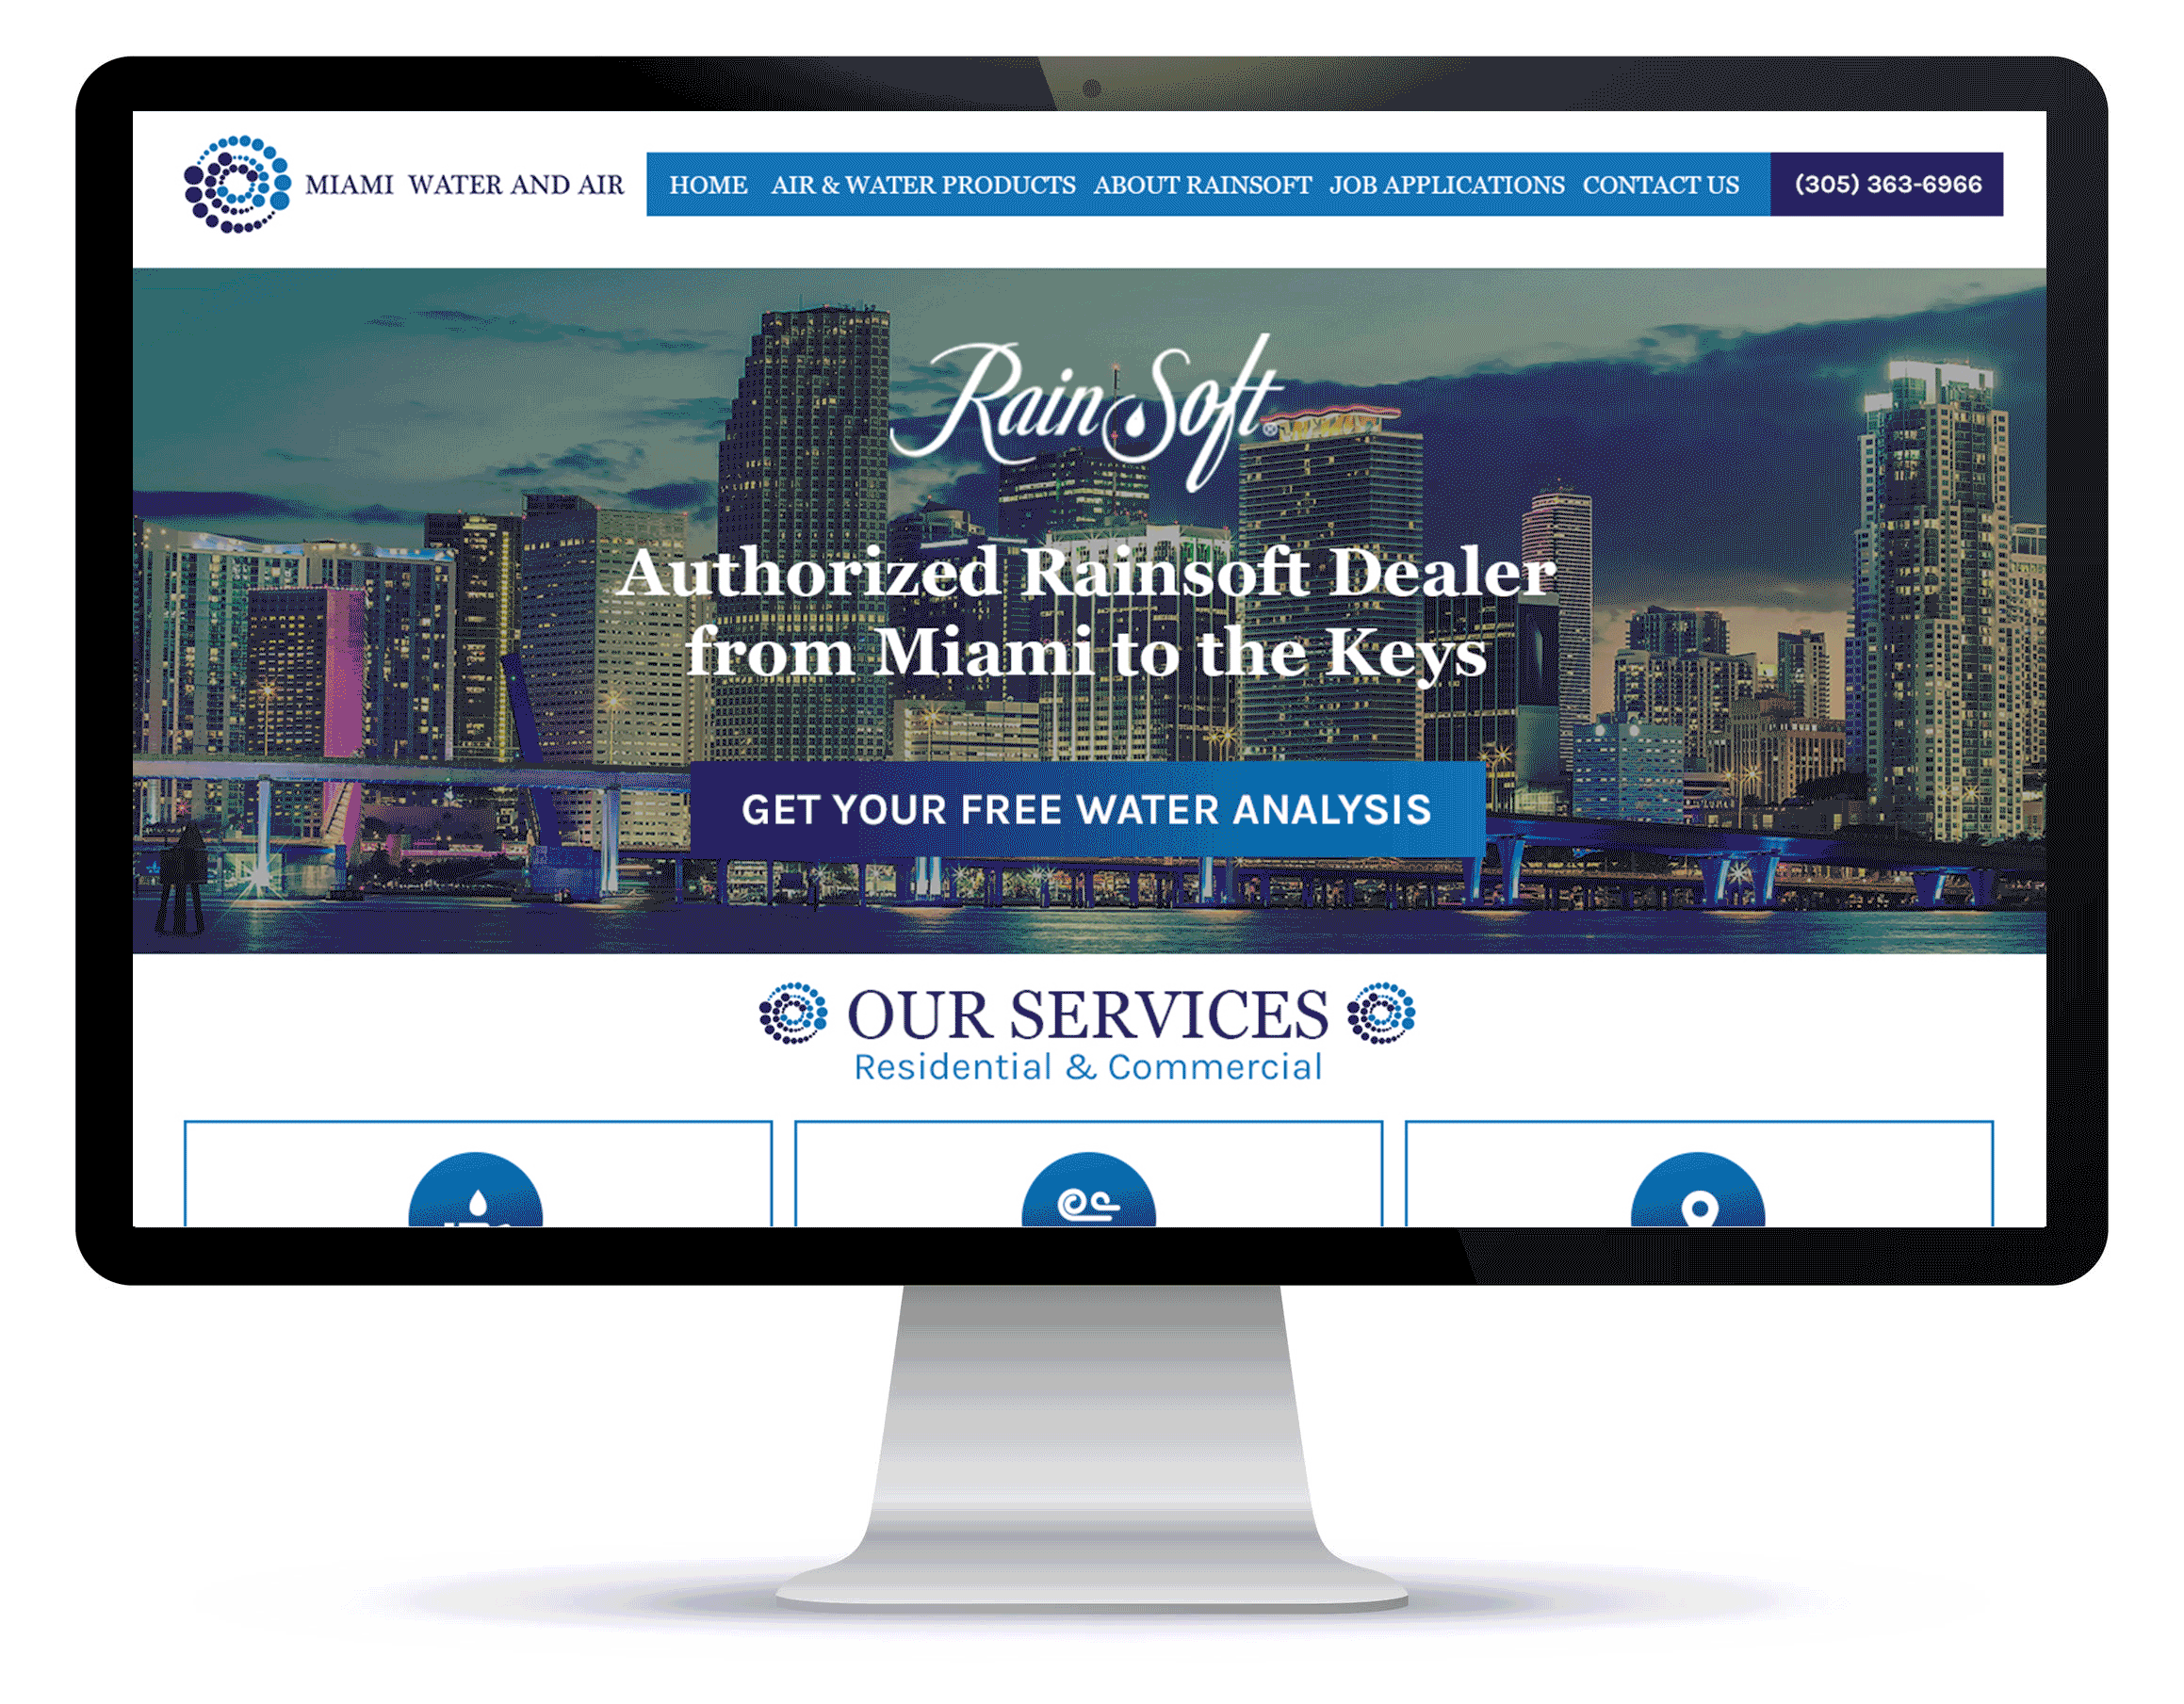 Miami water and air - website design